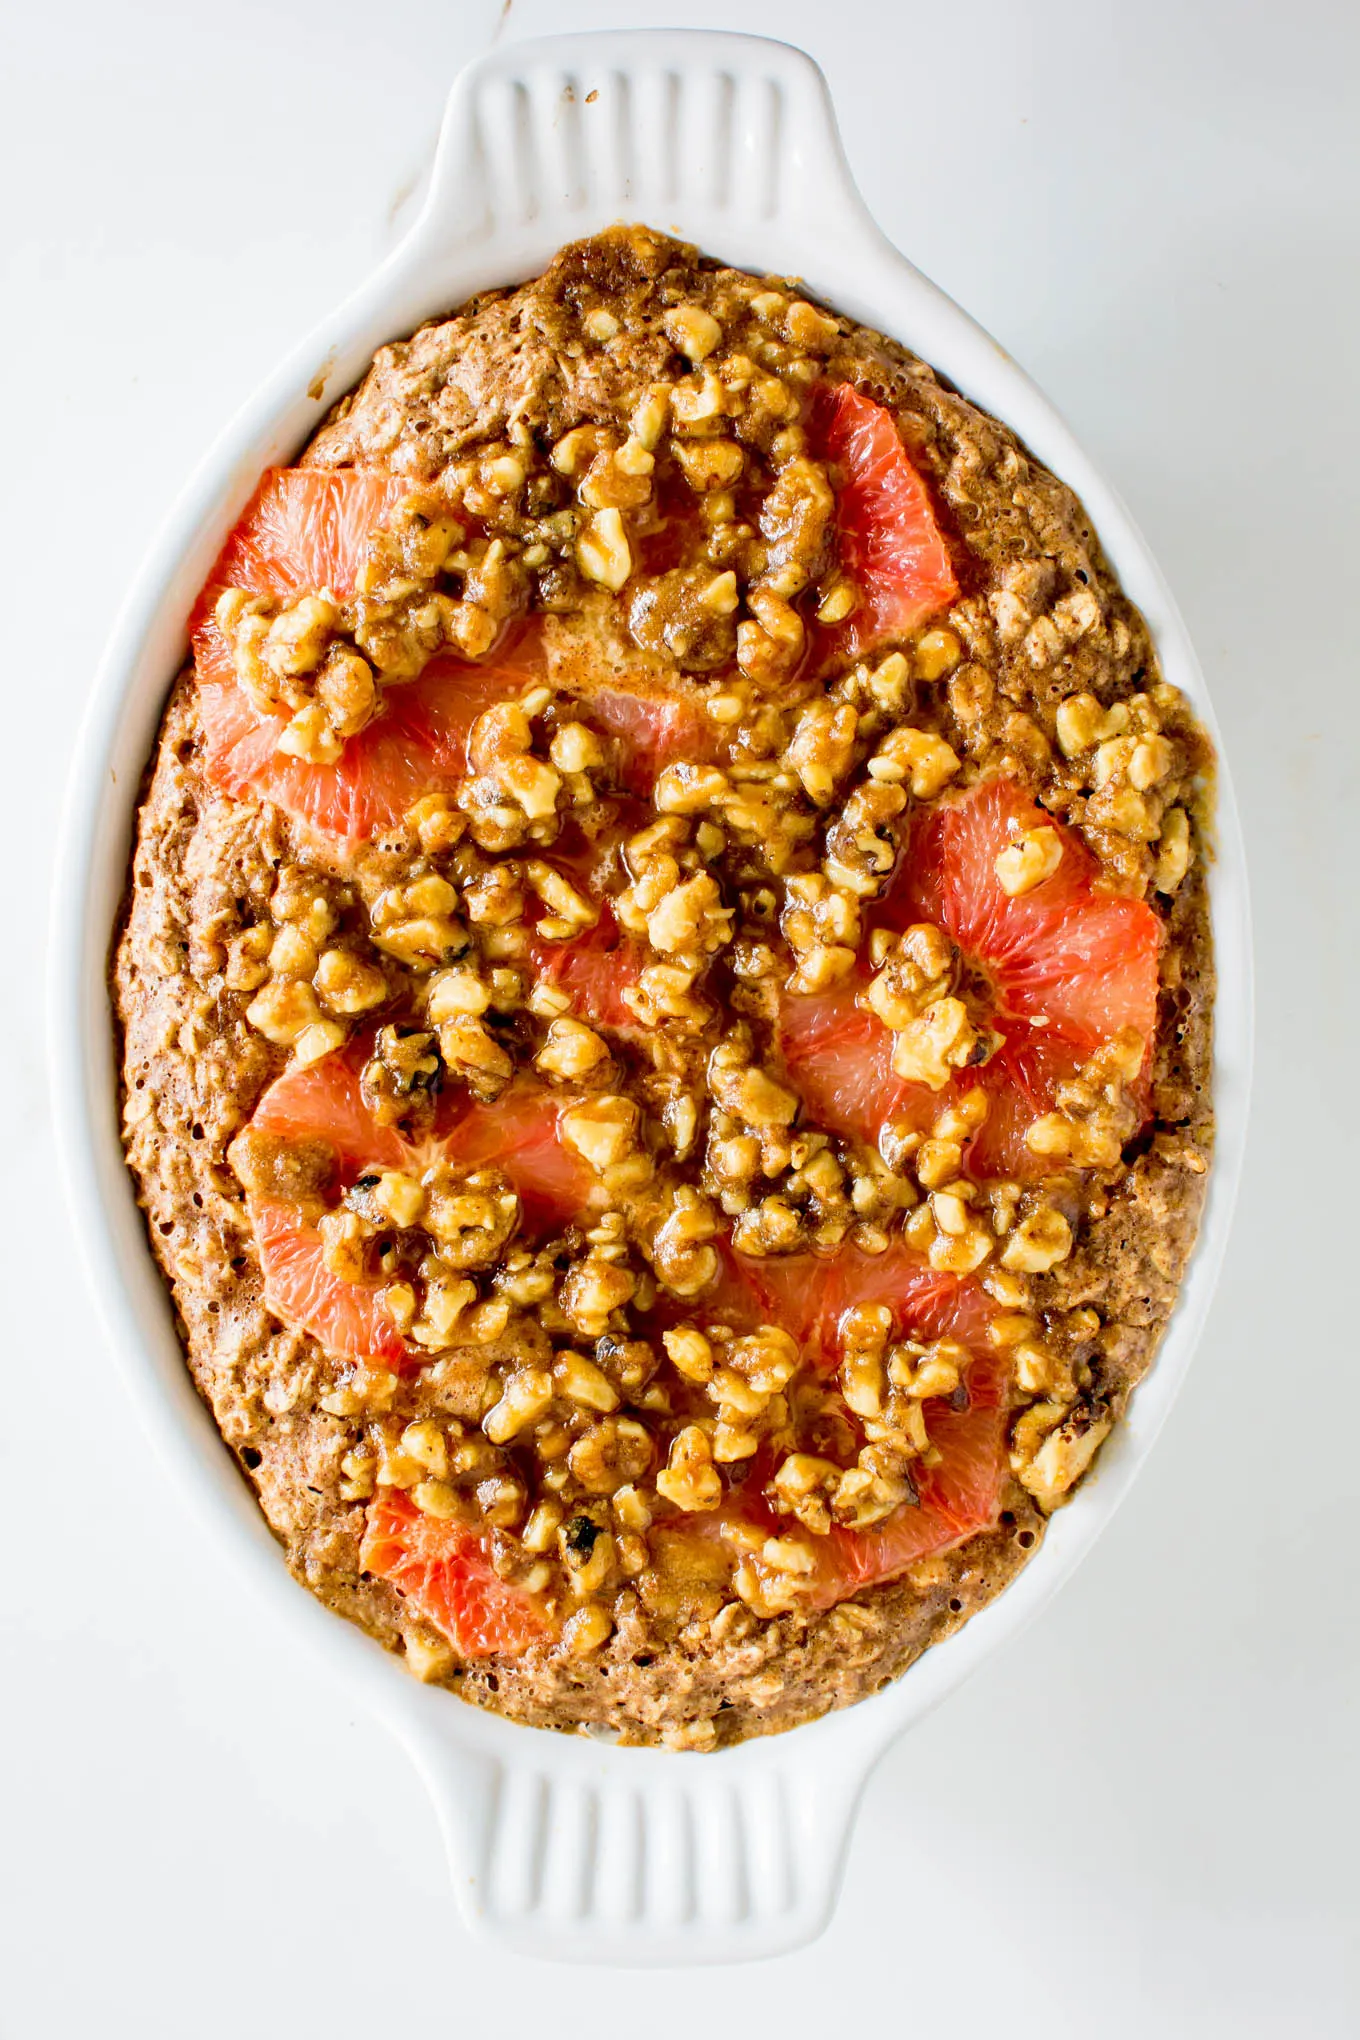 Grapefruit Baked Oatmeal with Walnut Streusel + 5 Healthy Ways to Eat Citrus Fruit